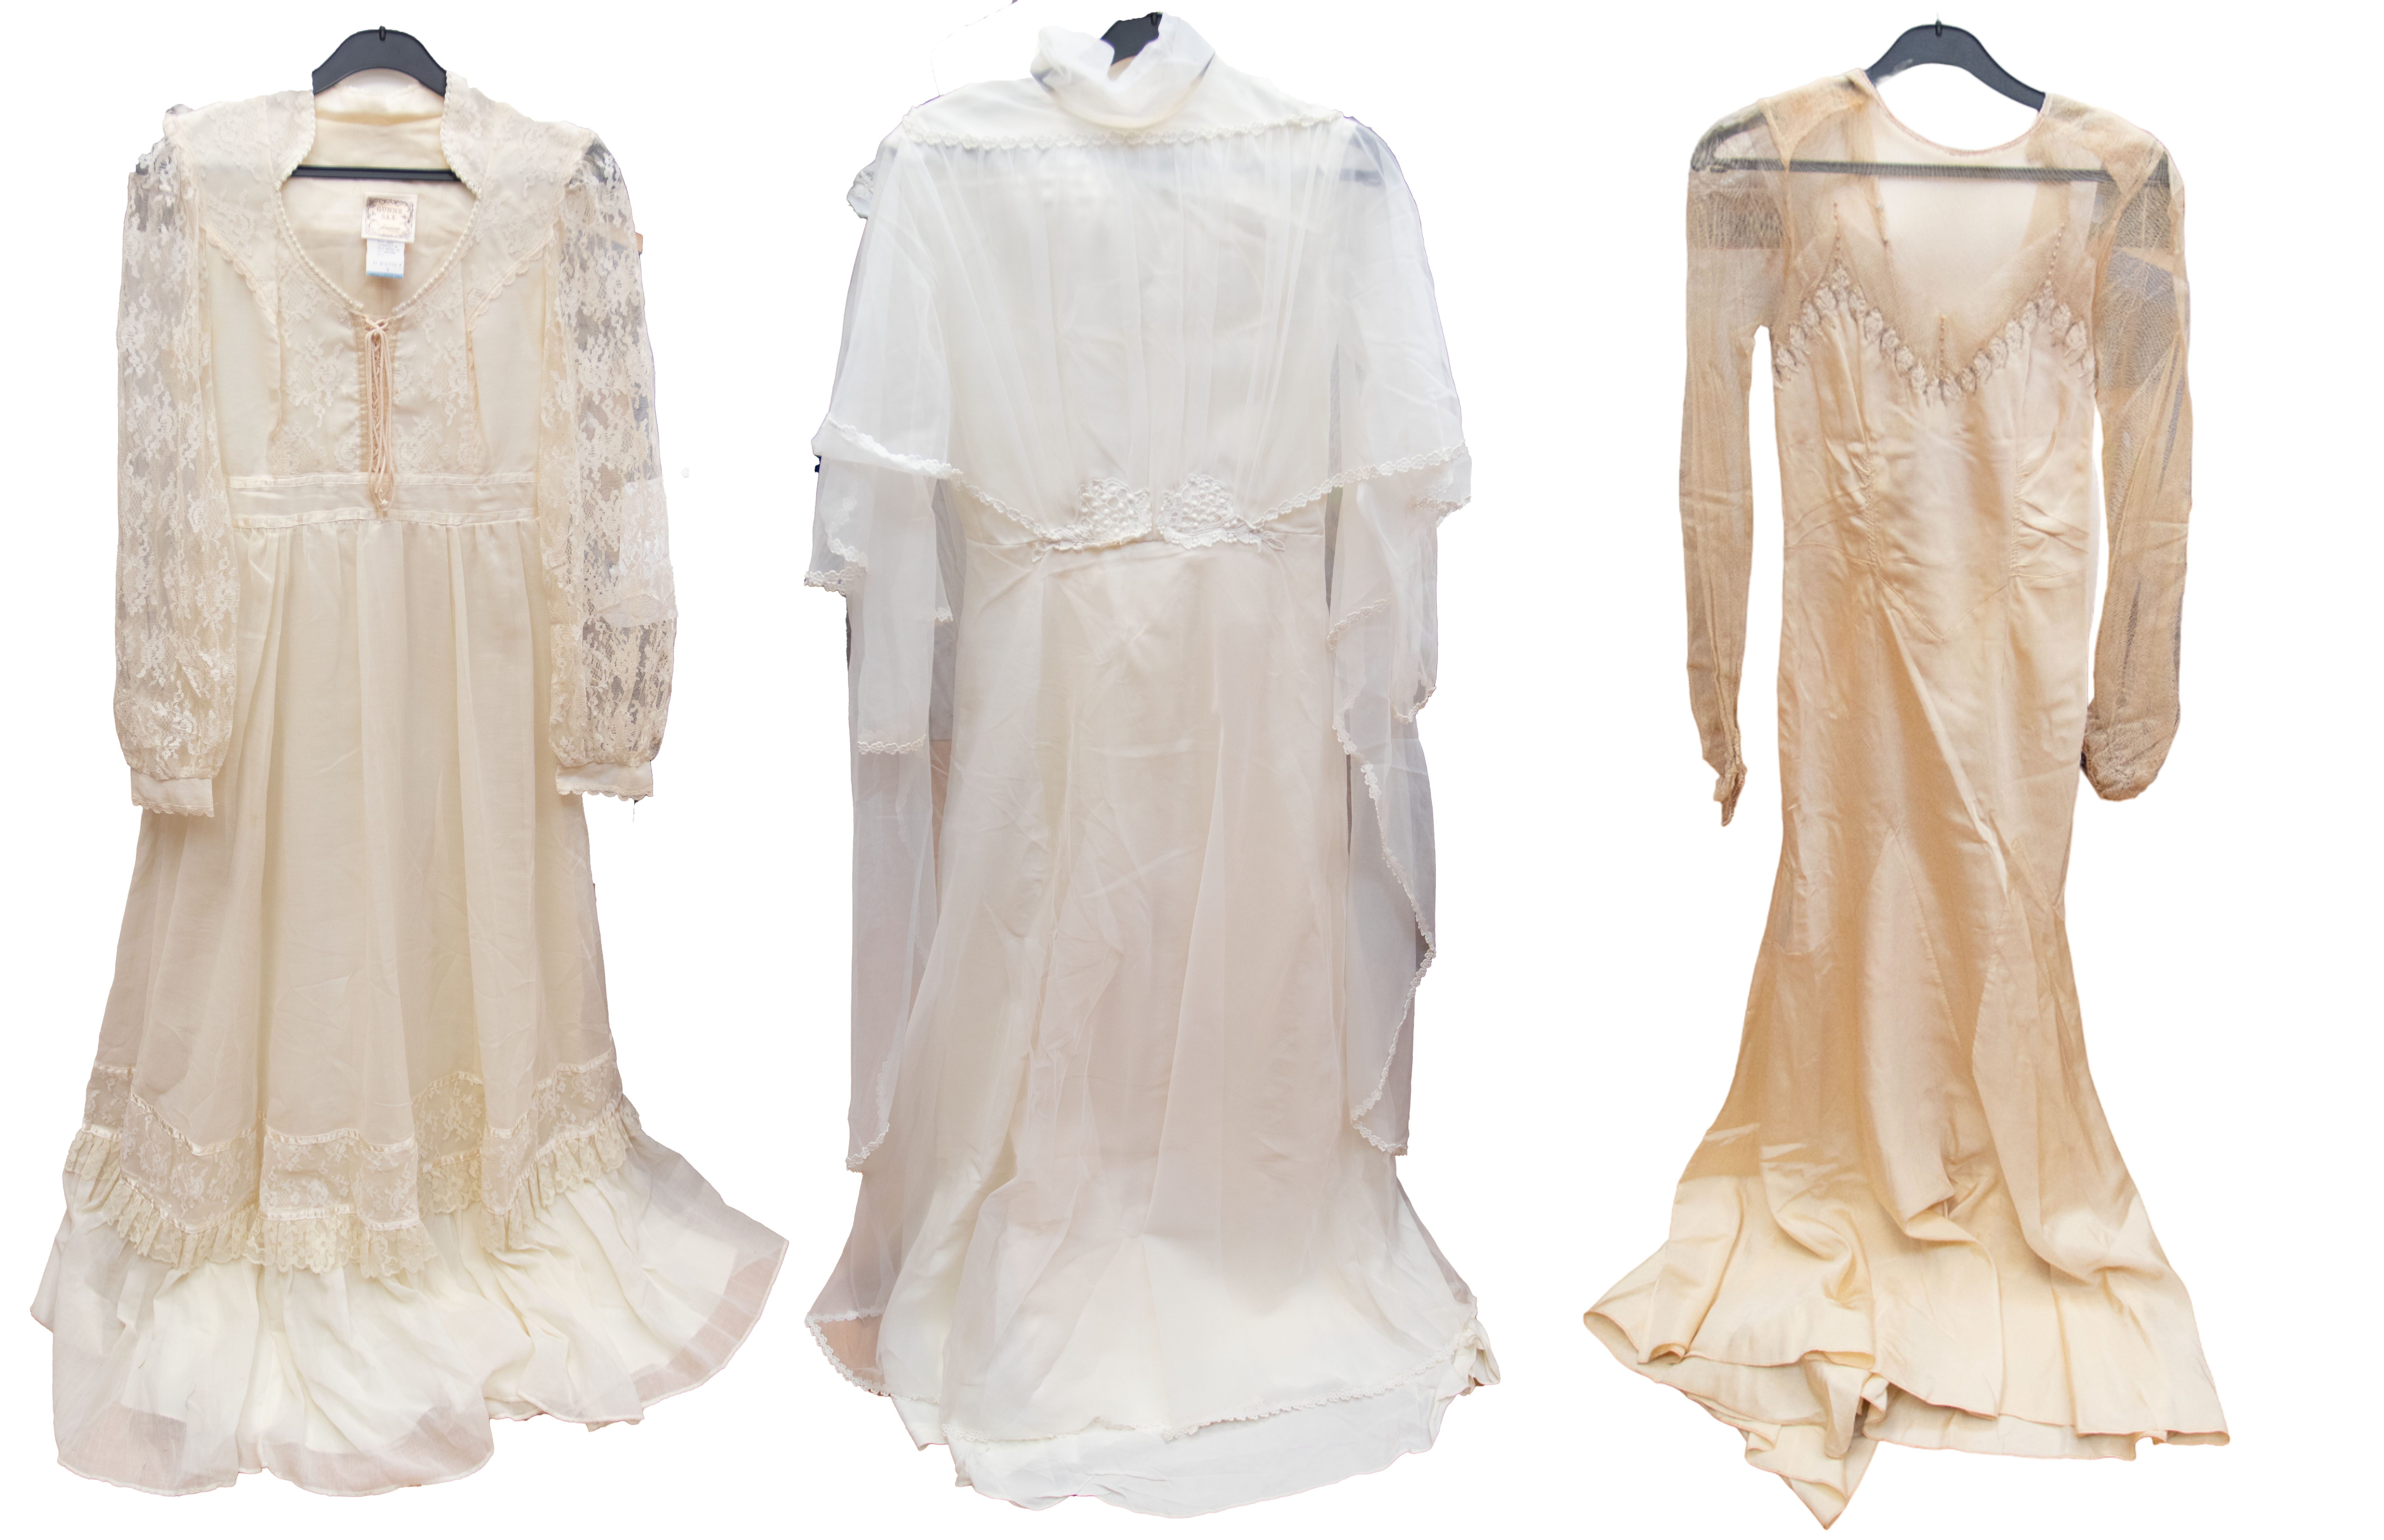 A mid 1930s pale cream taffeta wedding dress with a fitted tulle bodice, round neckline and full